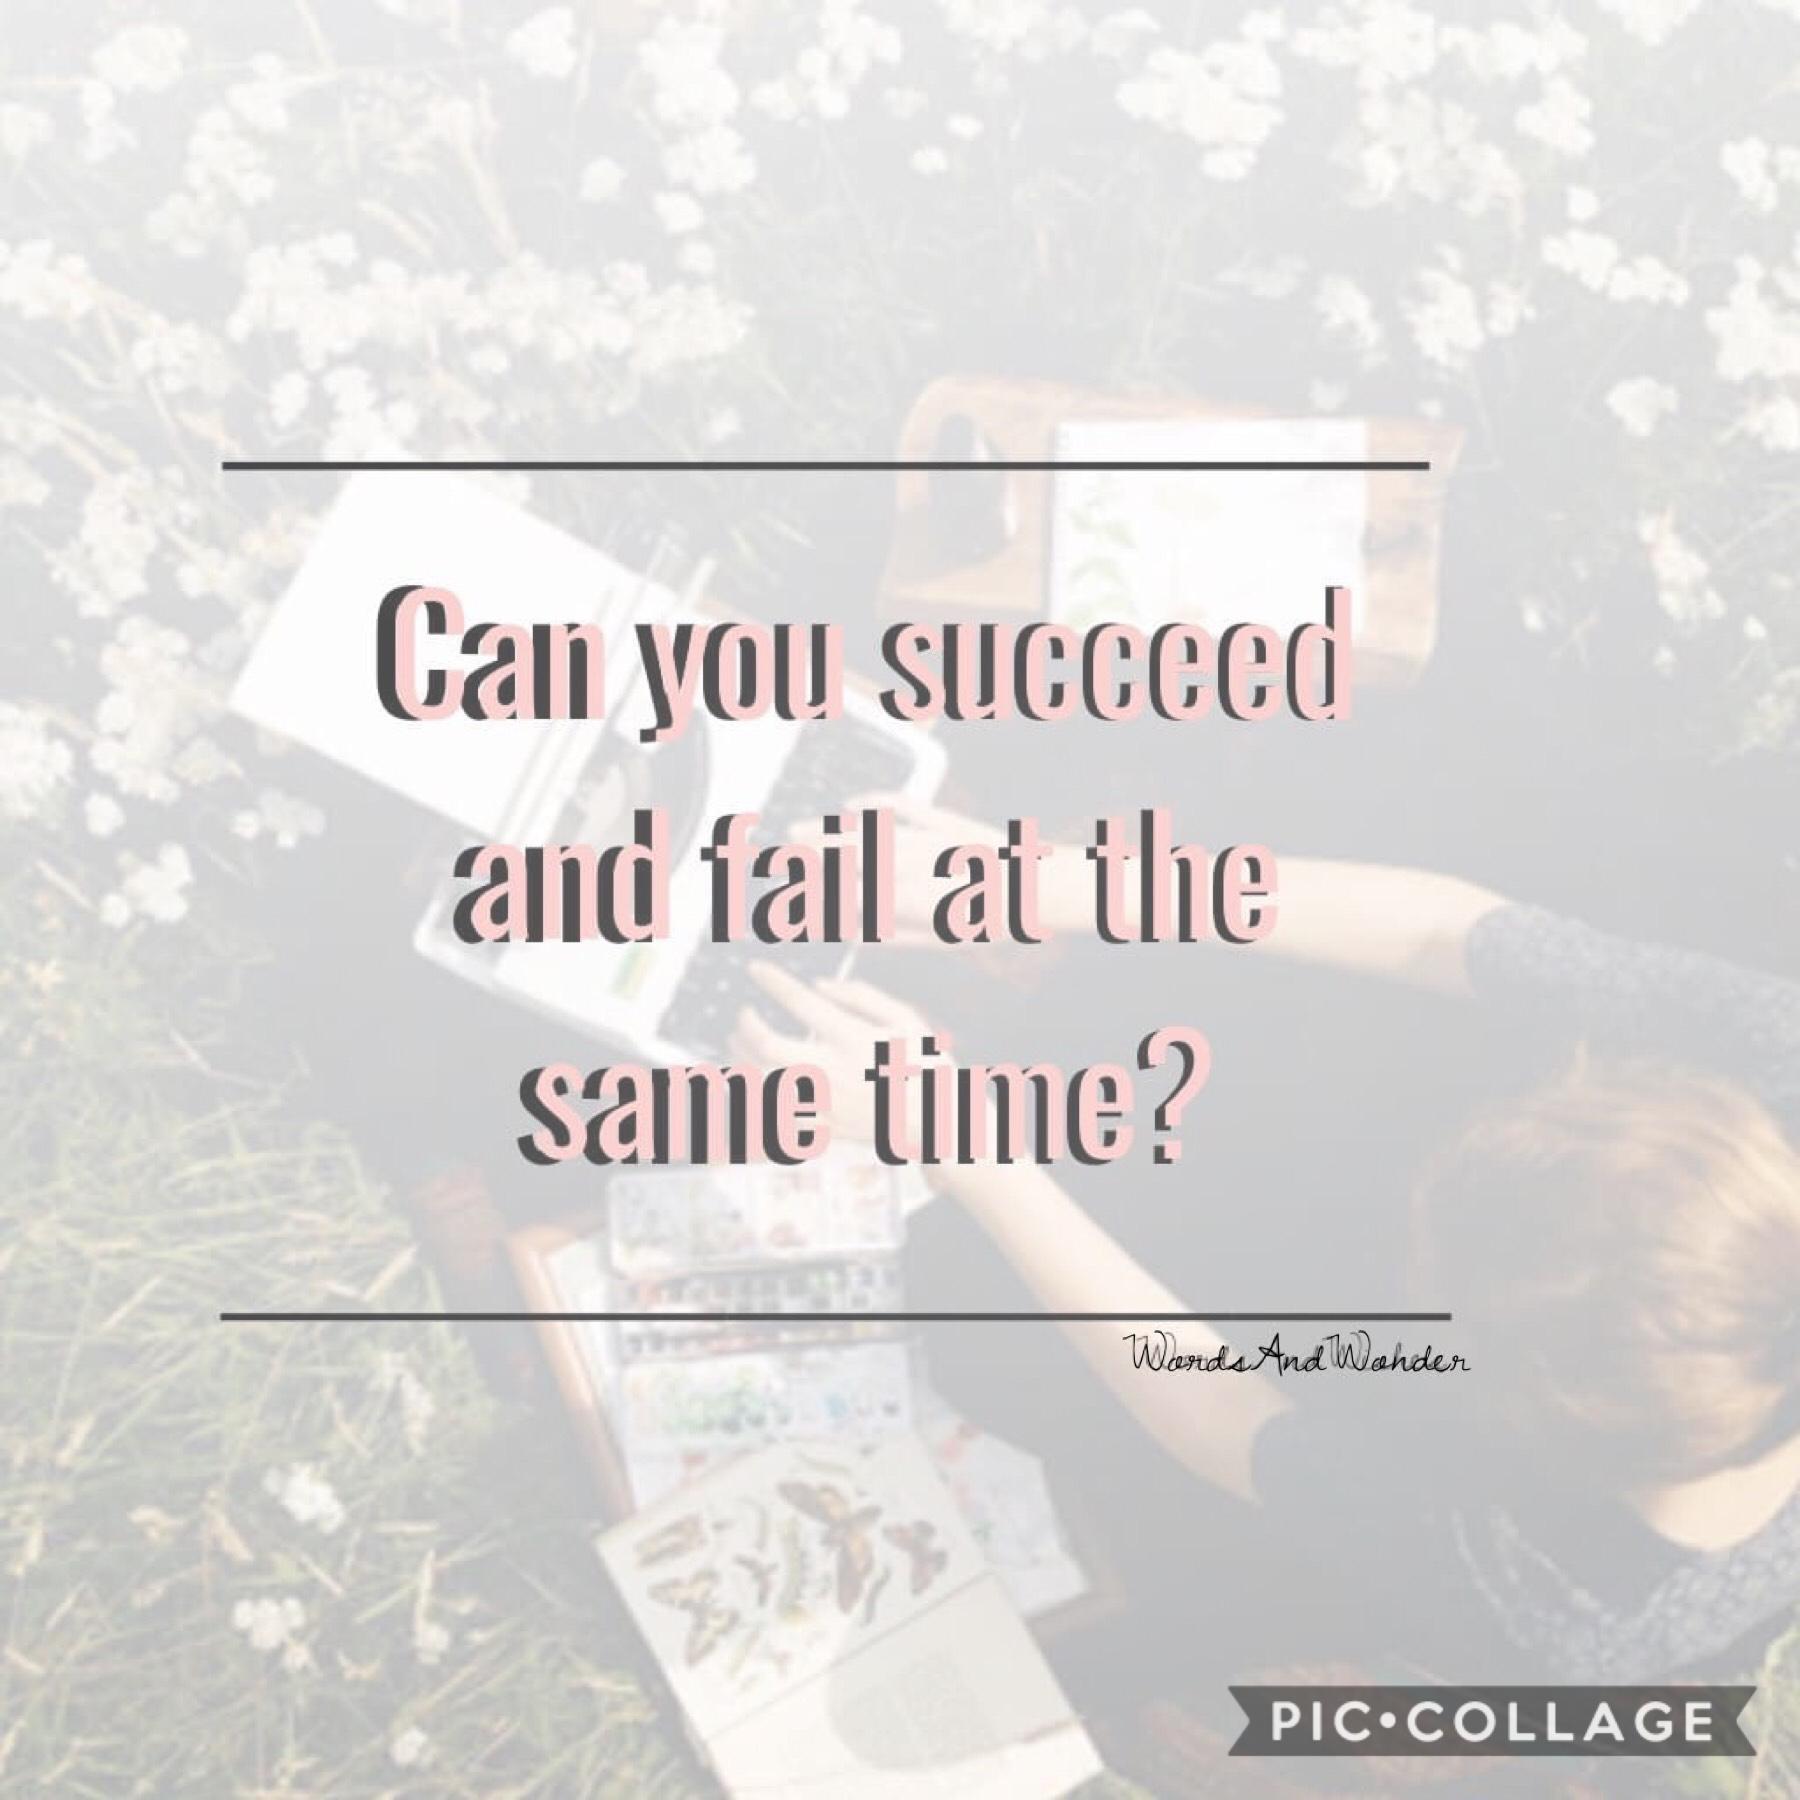 🌻💓Friday inspiration 💓🌻
This really made me think. Sometimes we can fail at first but go on to success with our failure. What do you guys think? ✨